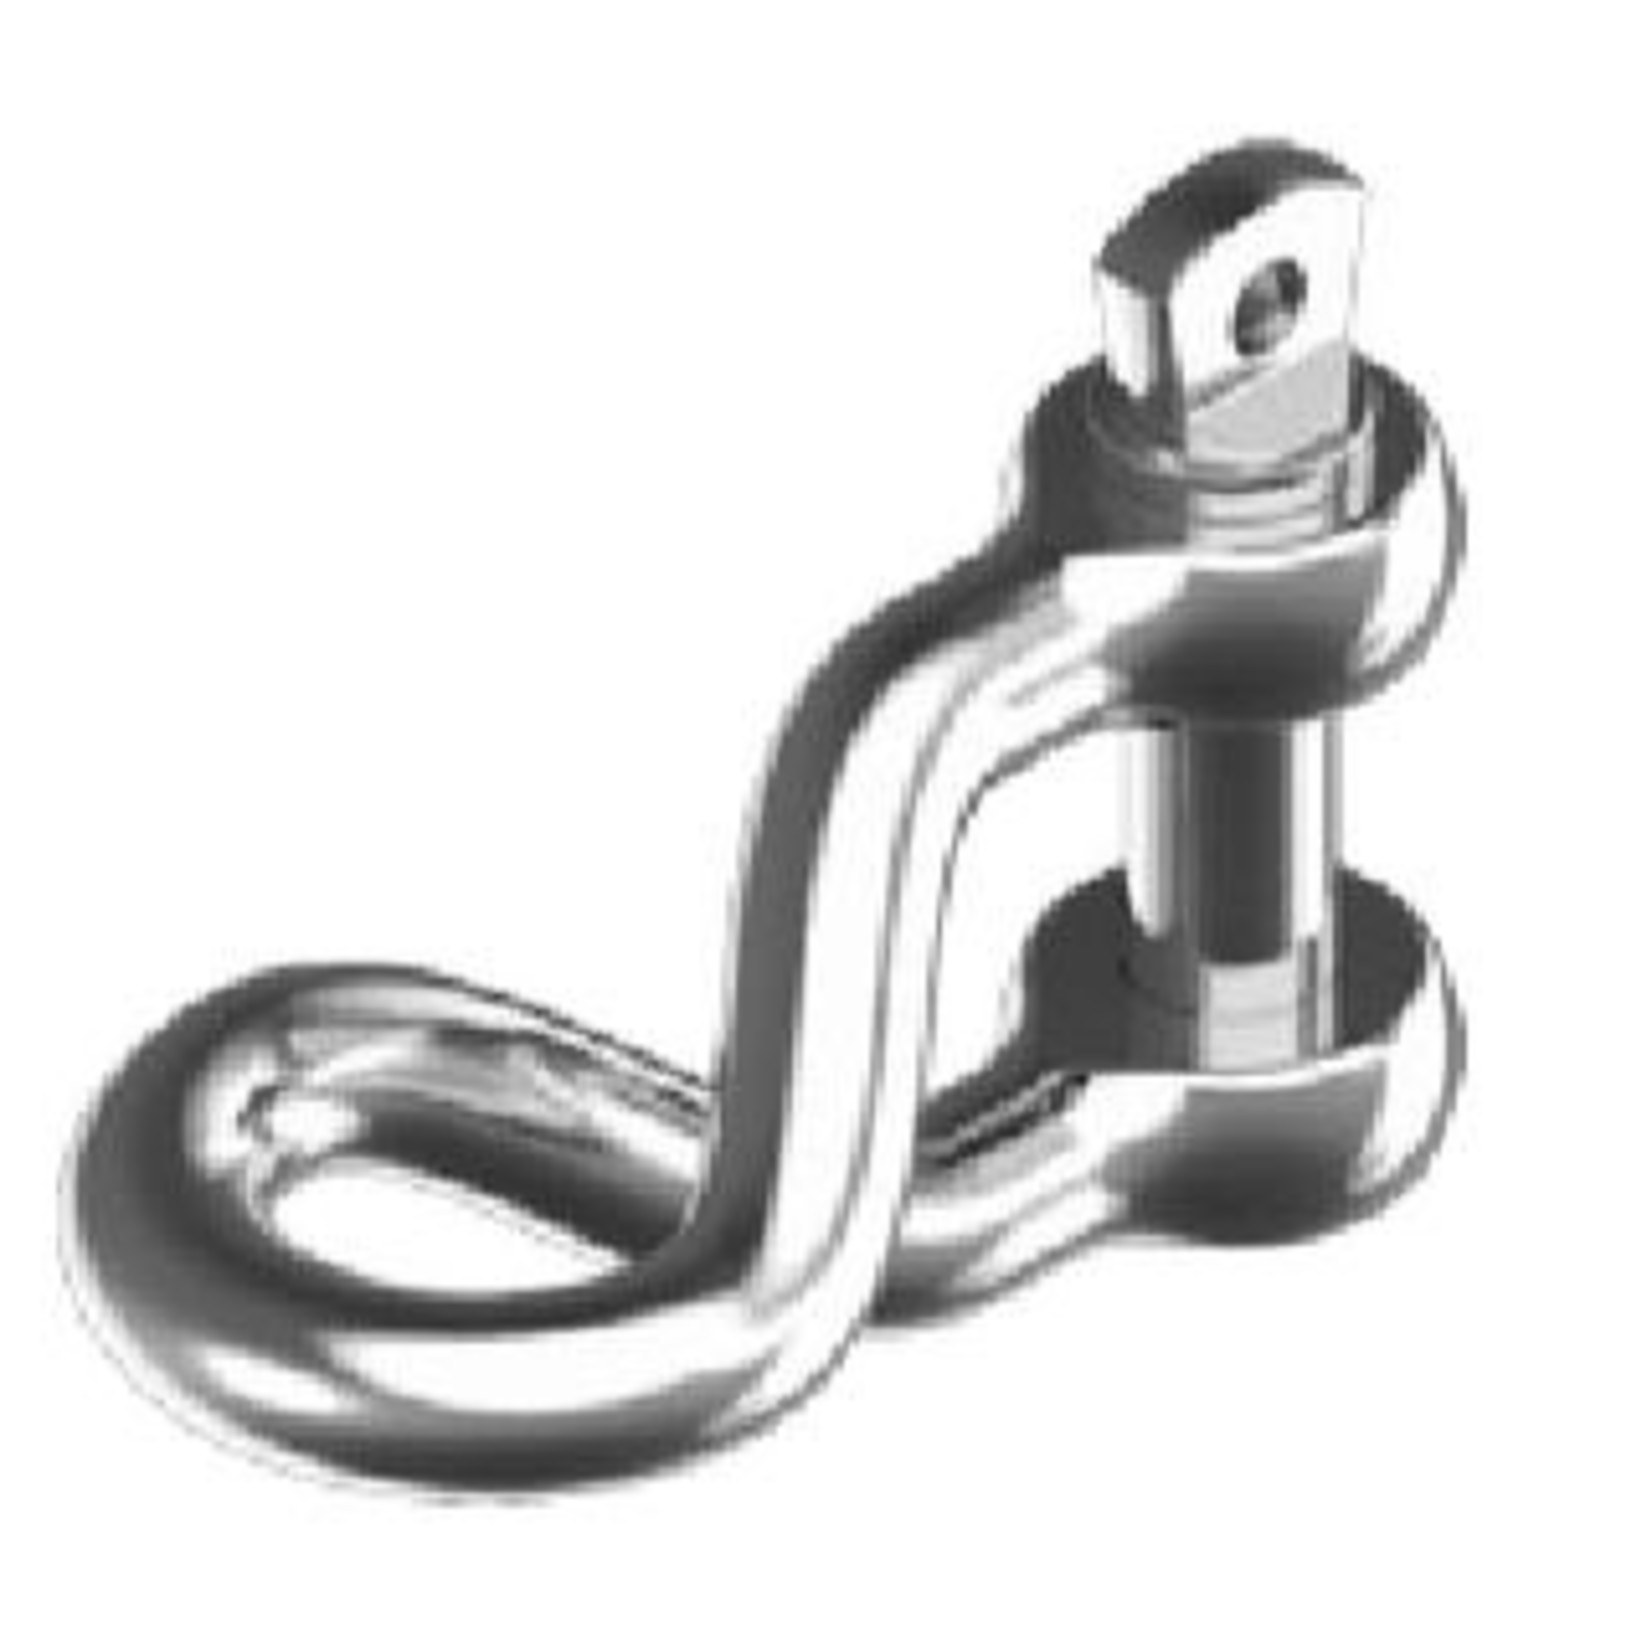 Stainless twisted shackle 10mm 10 pcs